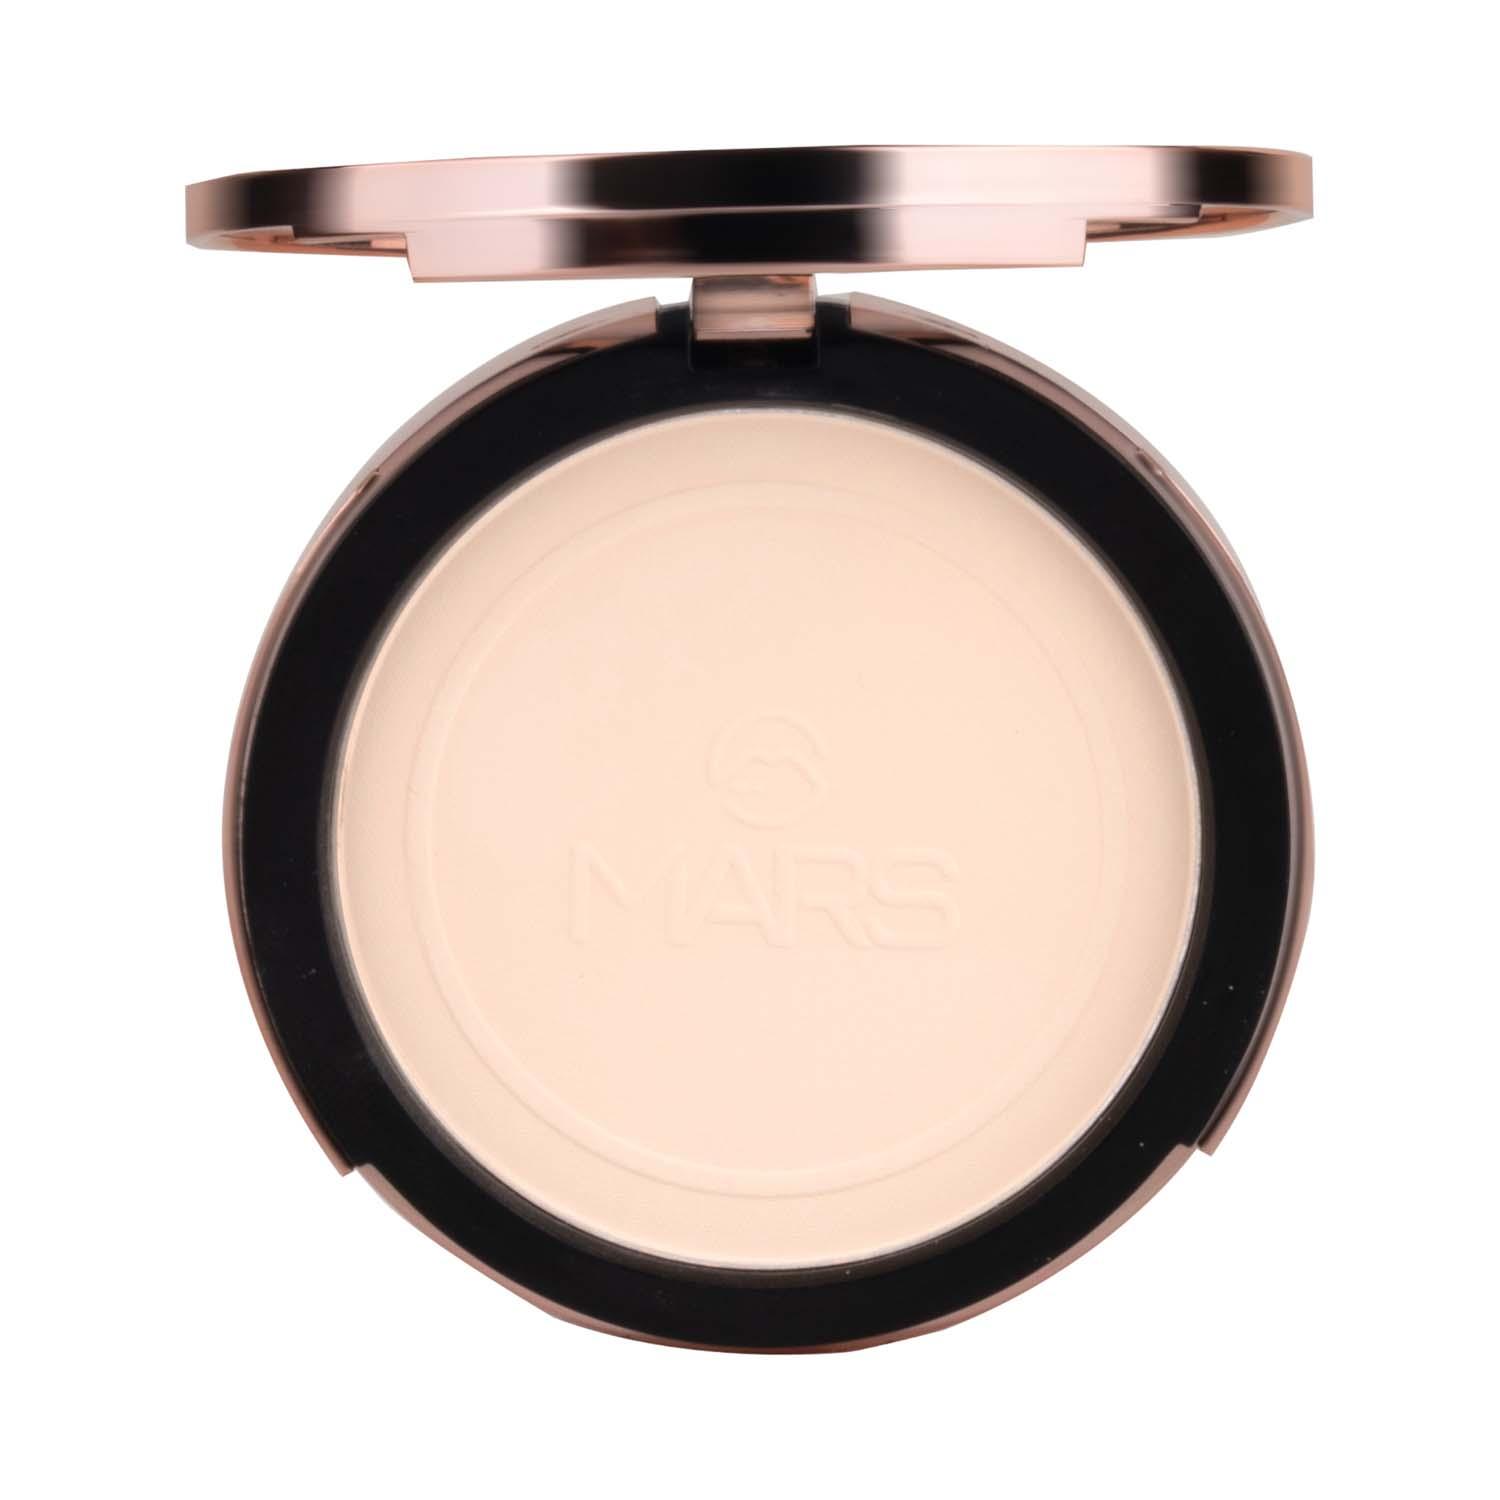 MARS | MARS Matte On Compact Powder With Puff Applicator - 02 Beige (8g)